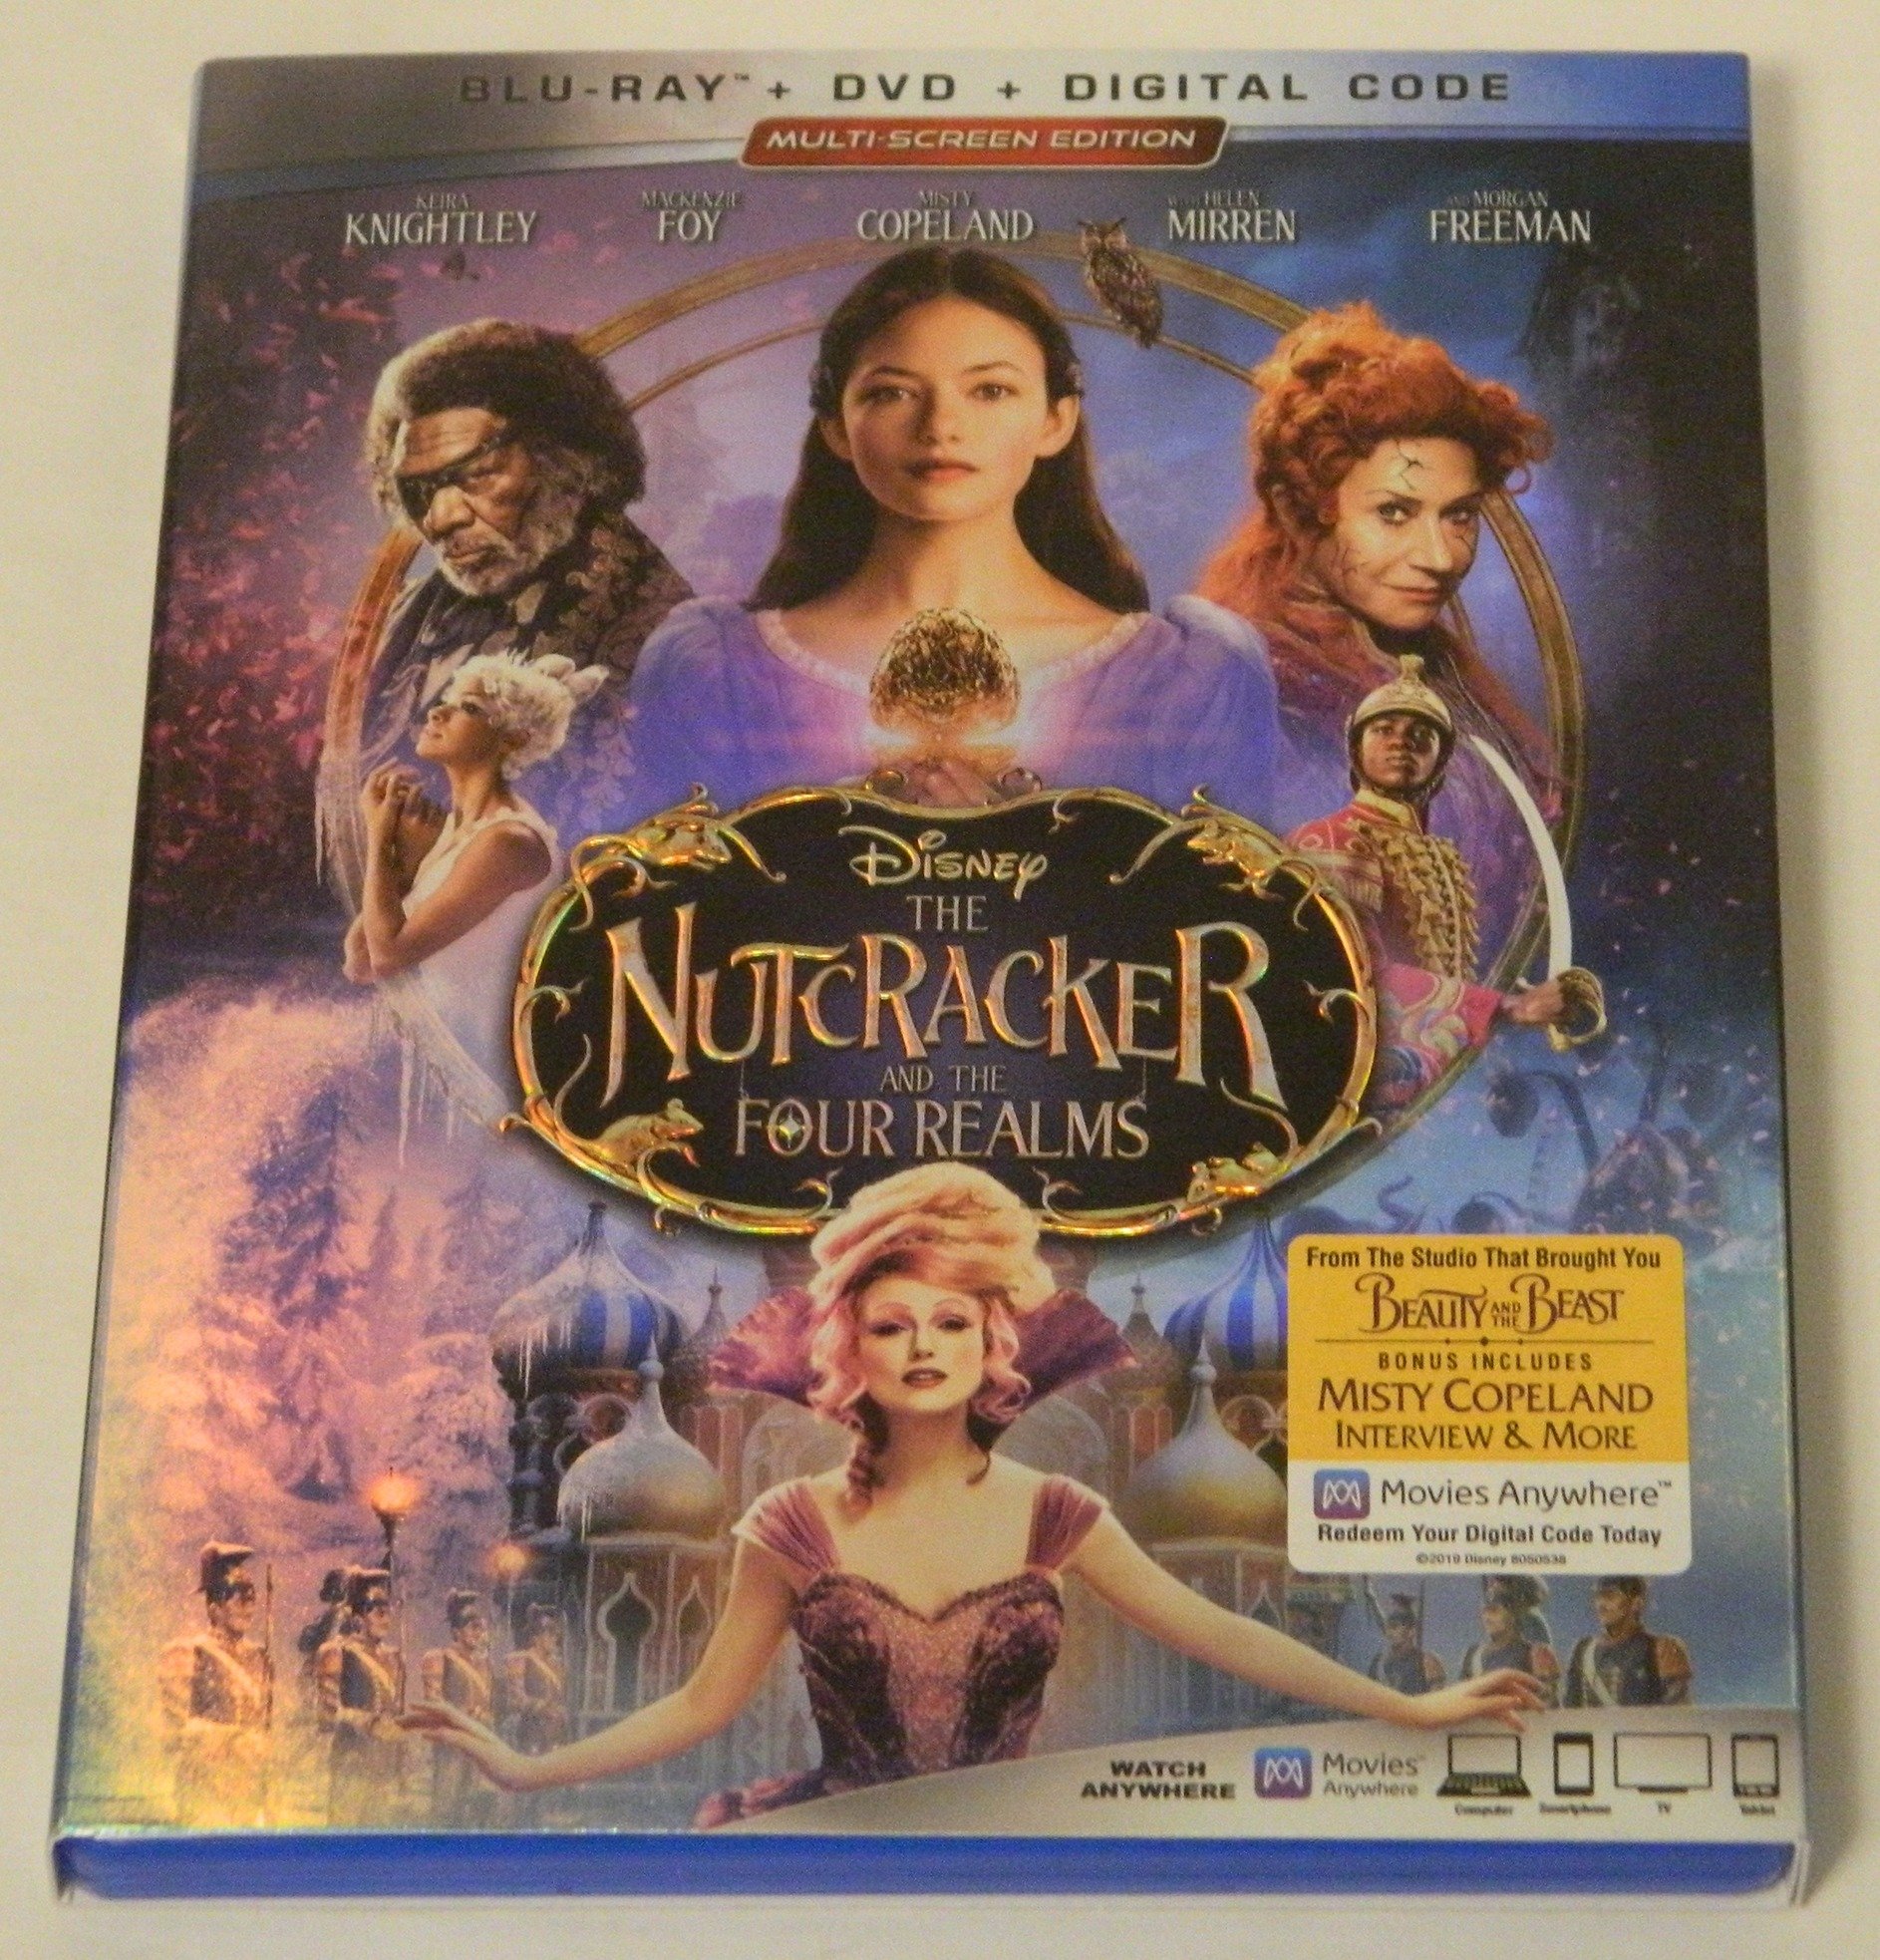 The Nutcracker and the Four Realms Blu-ray Review